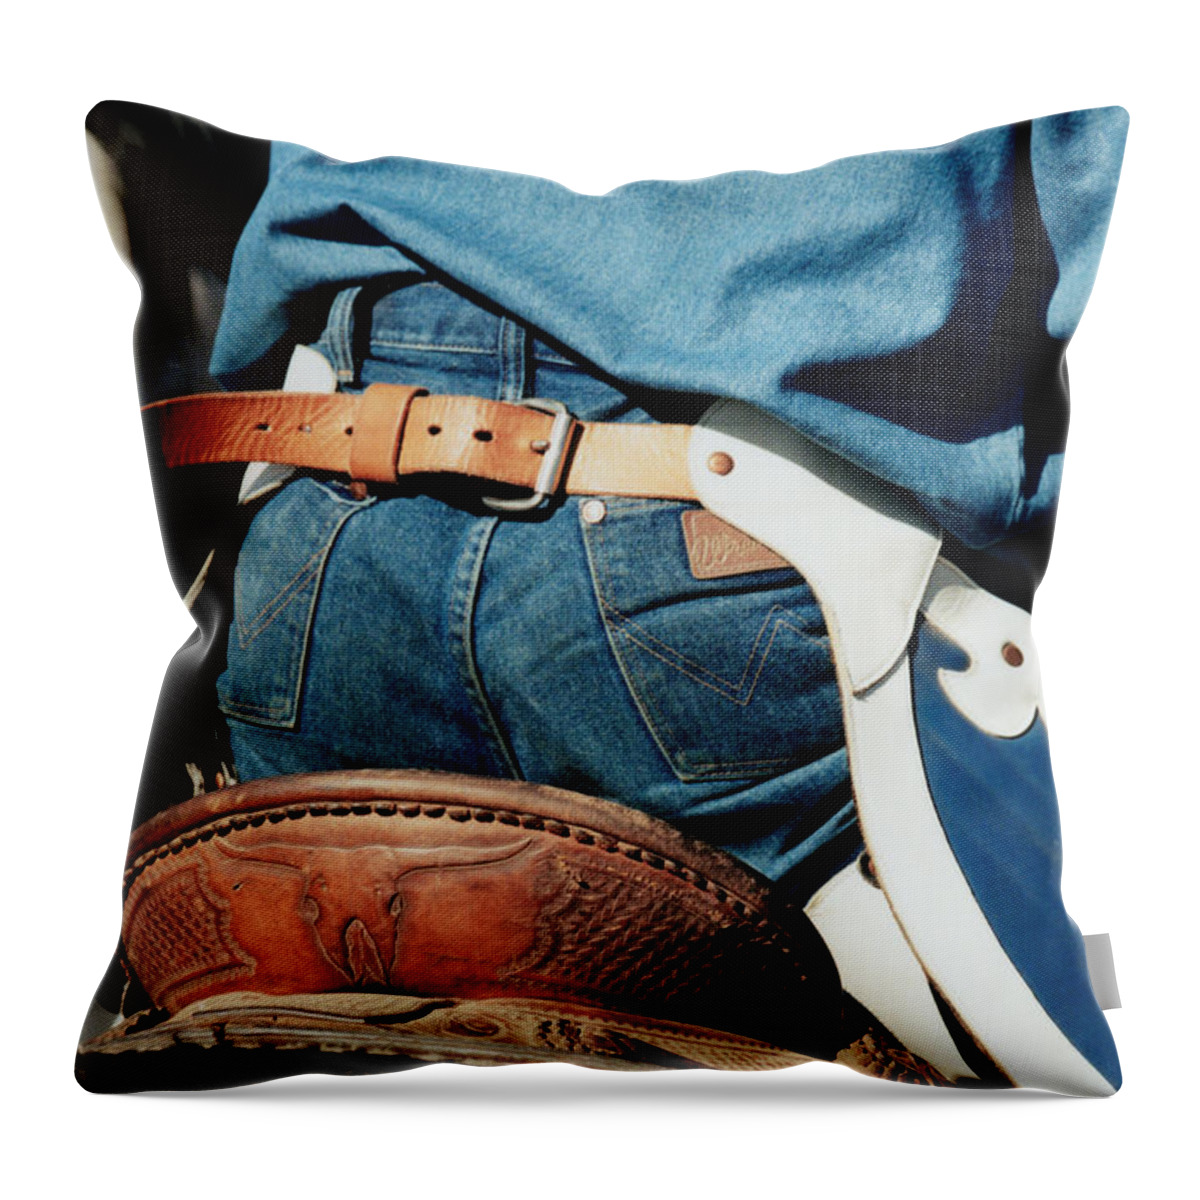 Rodeo Throw Pillow featuring the mixed media Rugged Wrangler by Amanda Smith